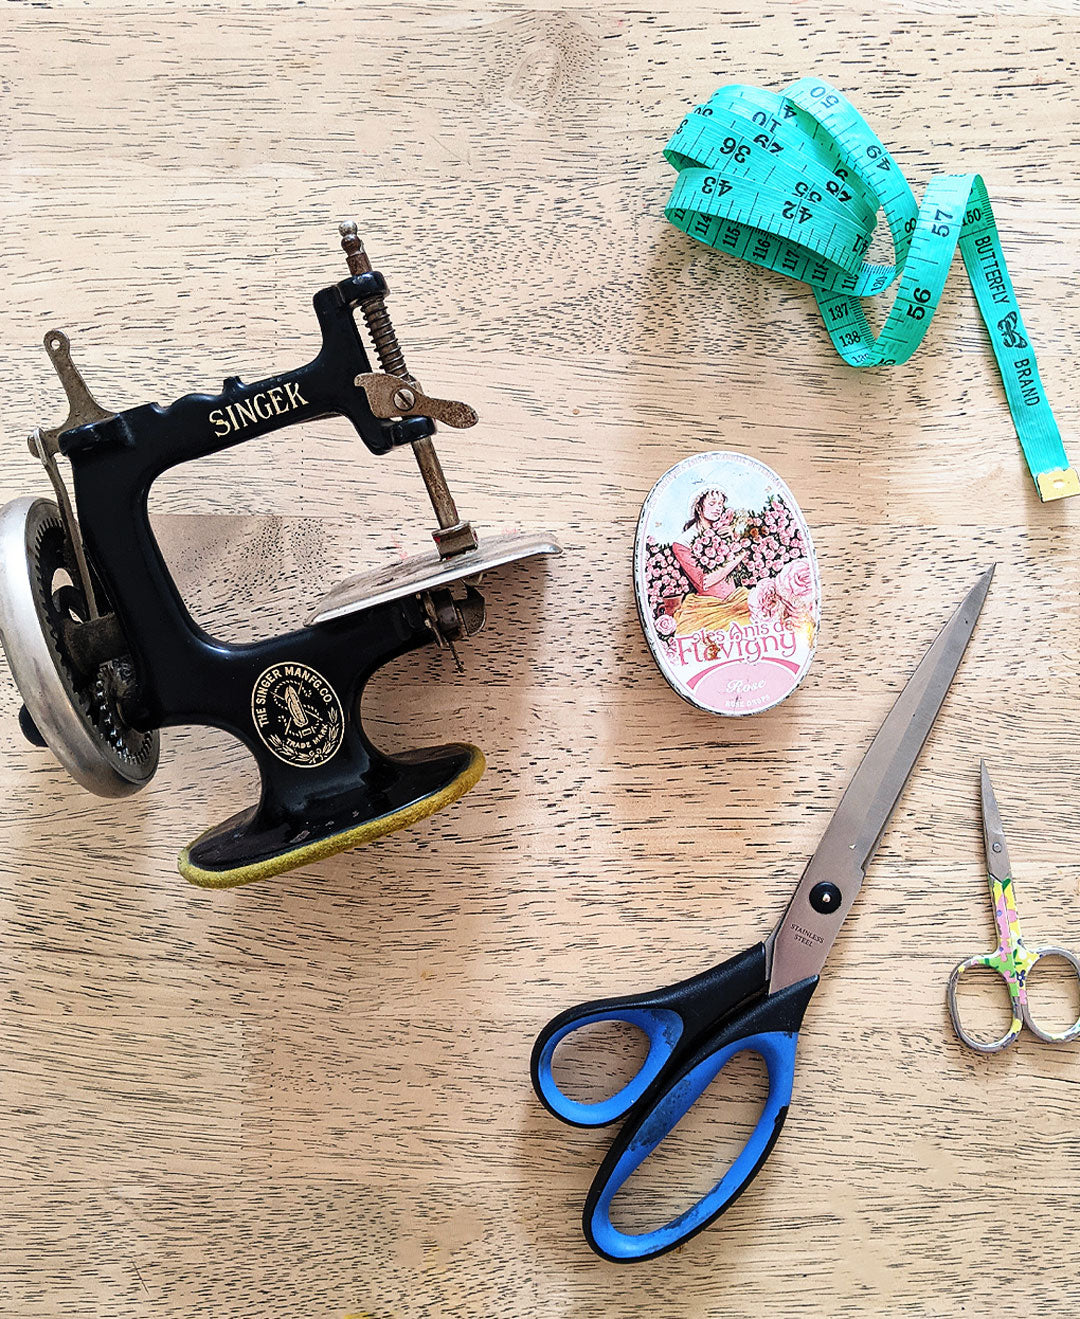 Sewing Course Duo: Mending by hand and with a sewing machine